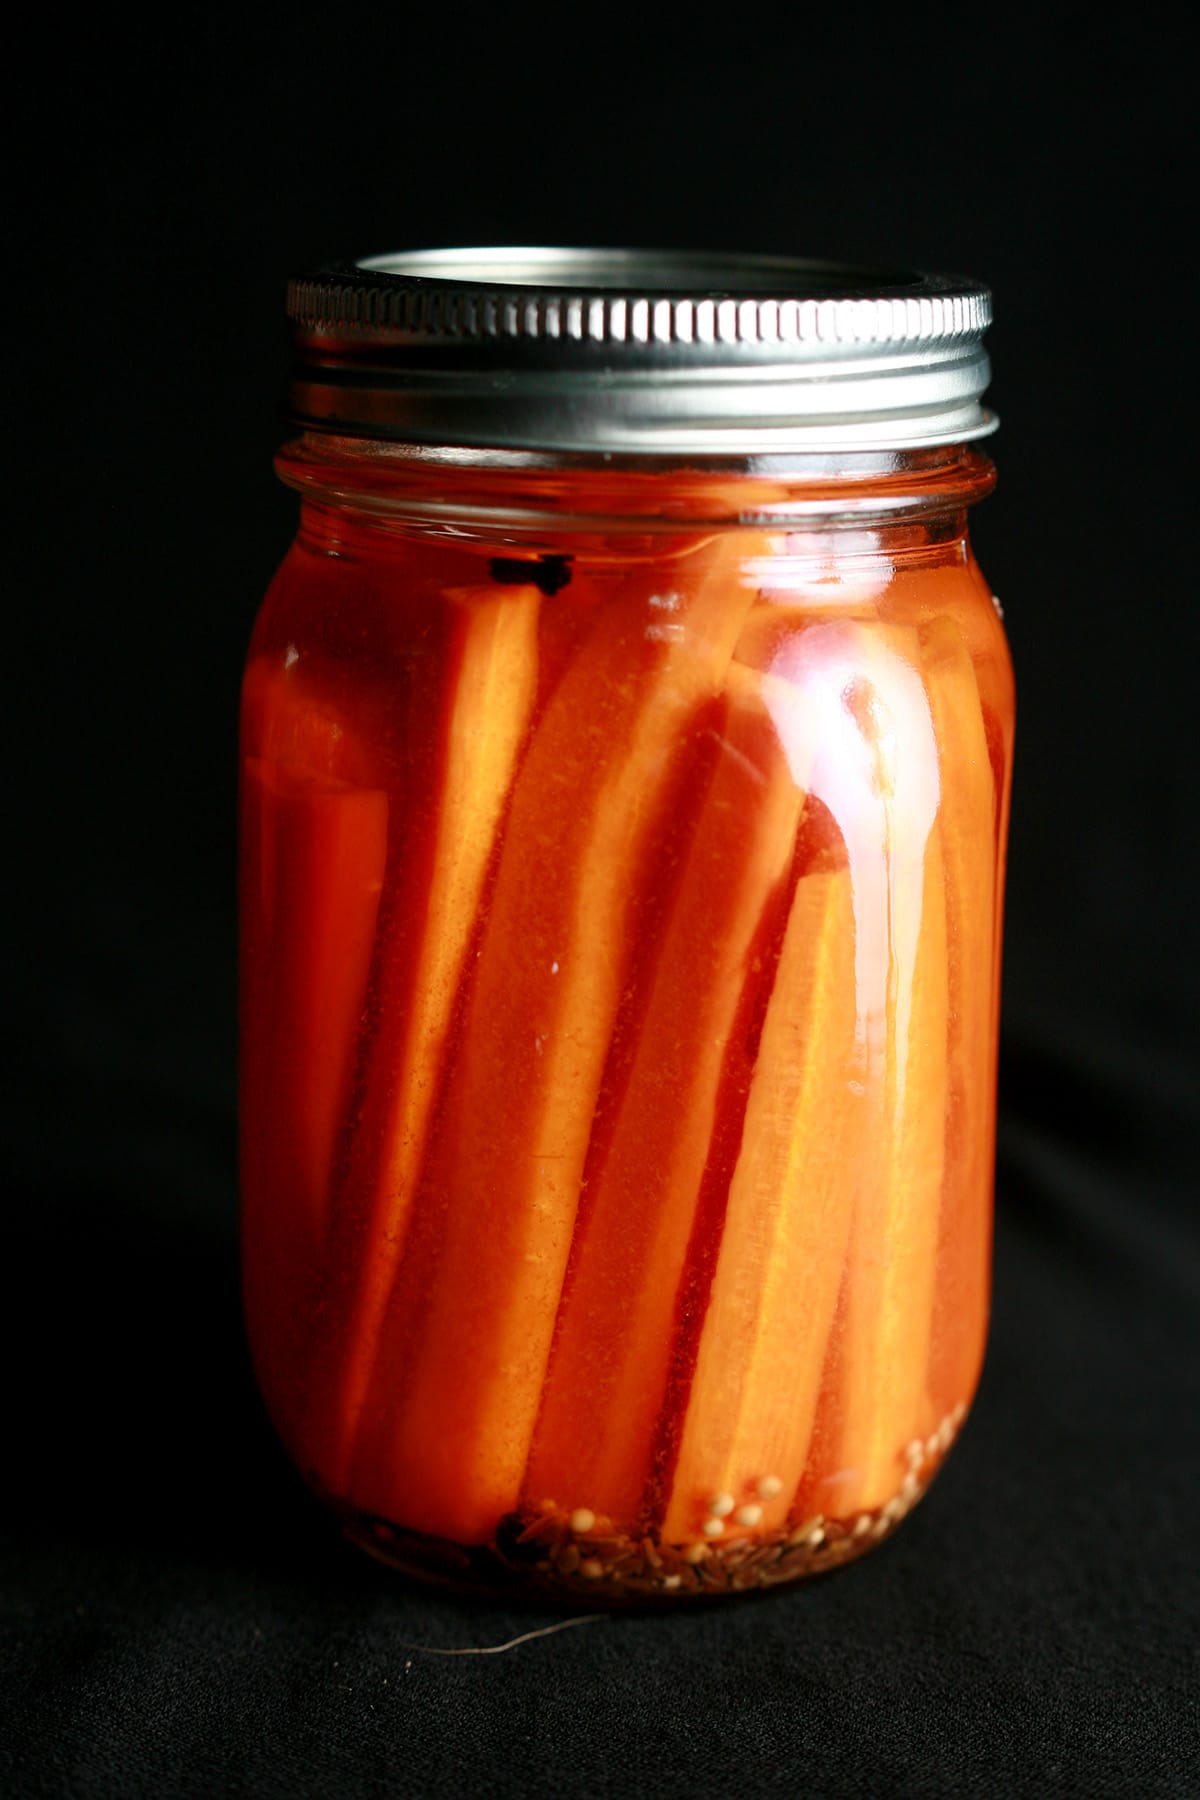 A jar of homemade pickled carrots.